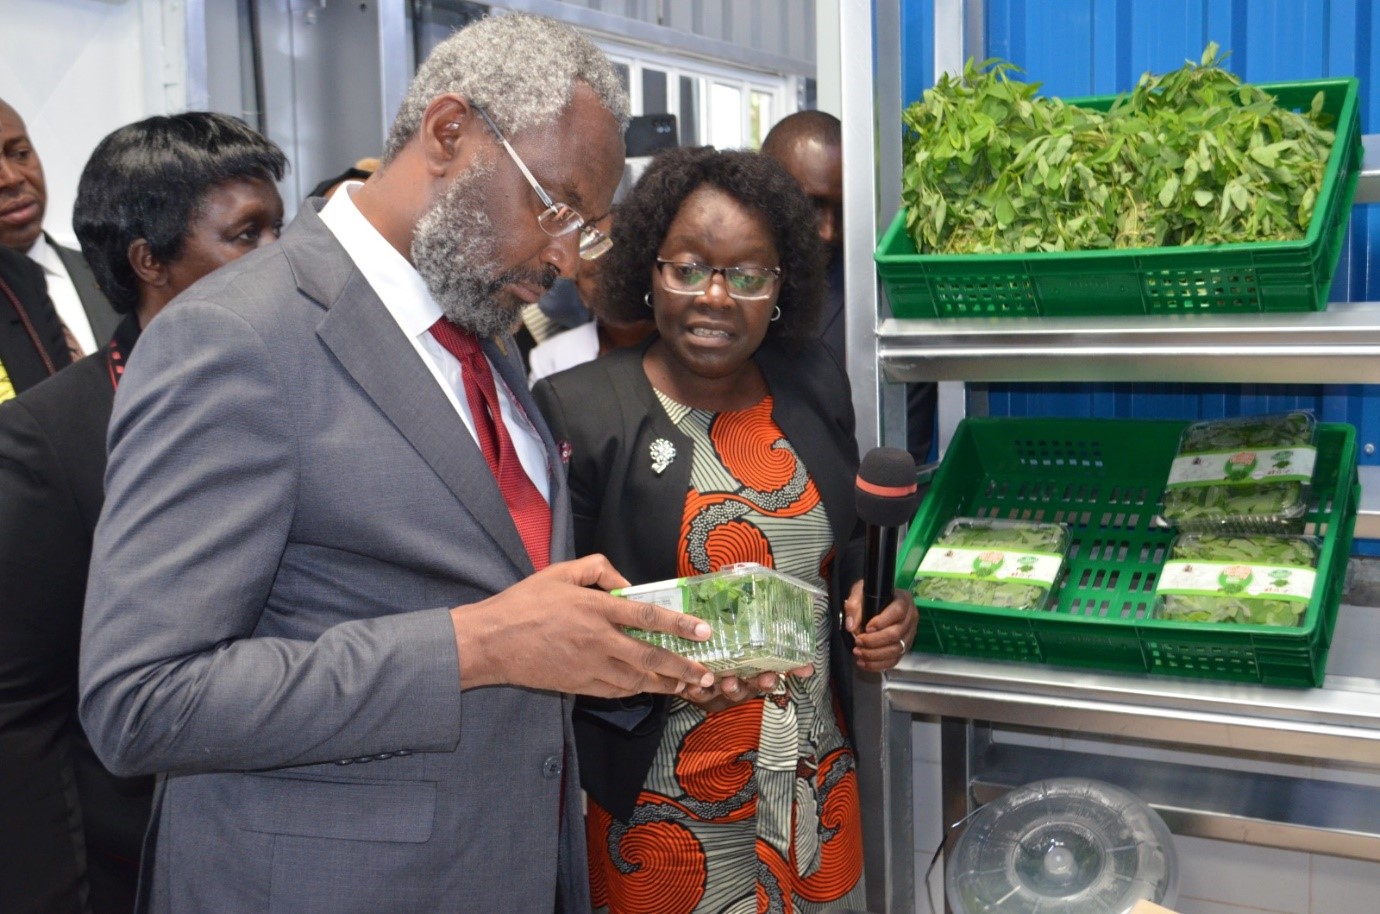 Prof. Kiama takes a closer look at the plucked and packaged vegetables in branded punnets